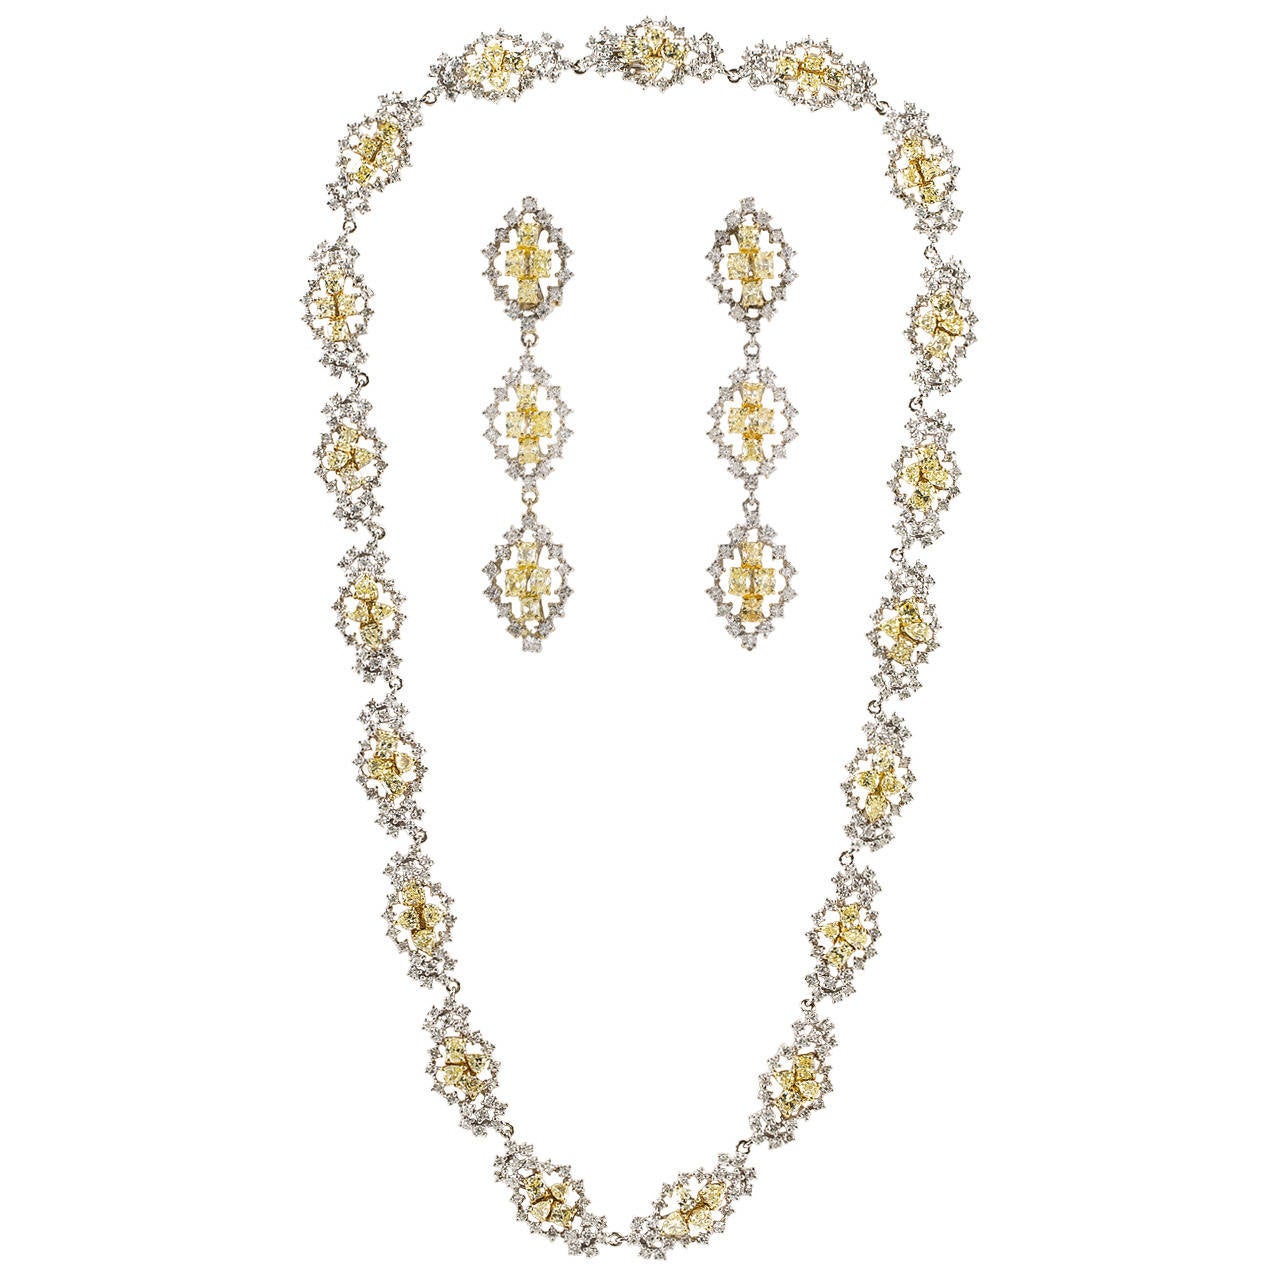 Multishape Yellow and White Diamond Necklace and Earrings Set